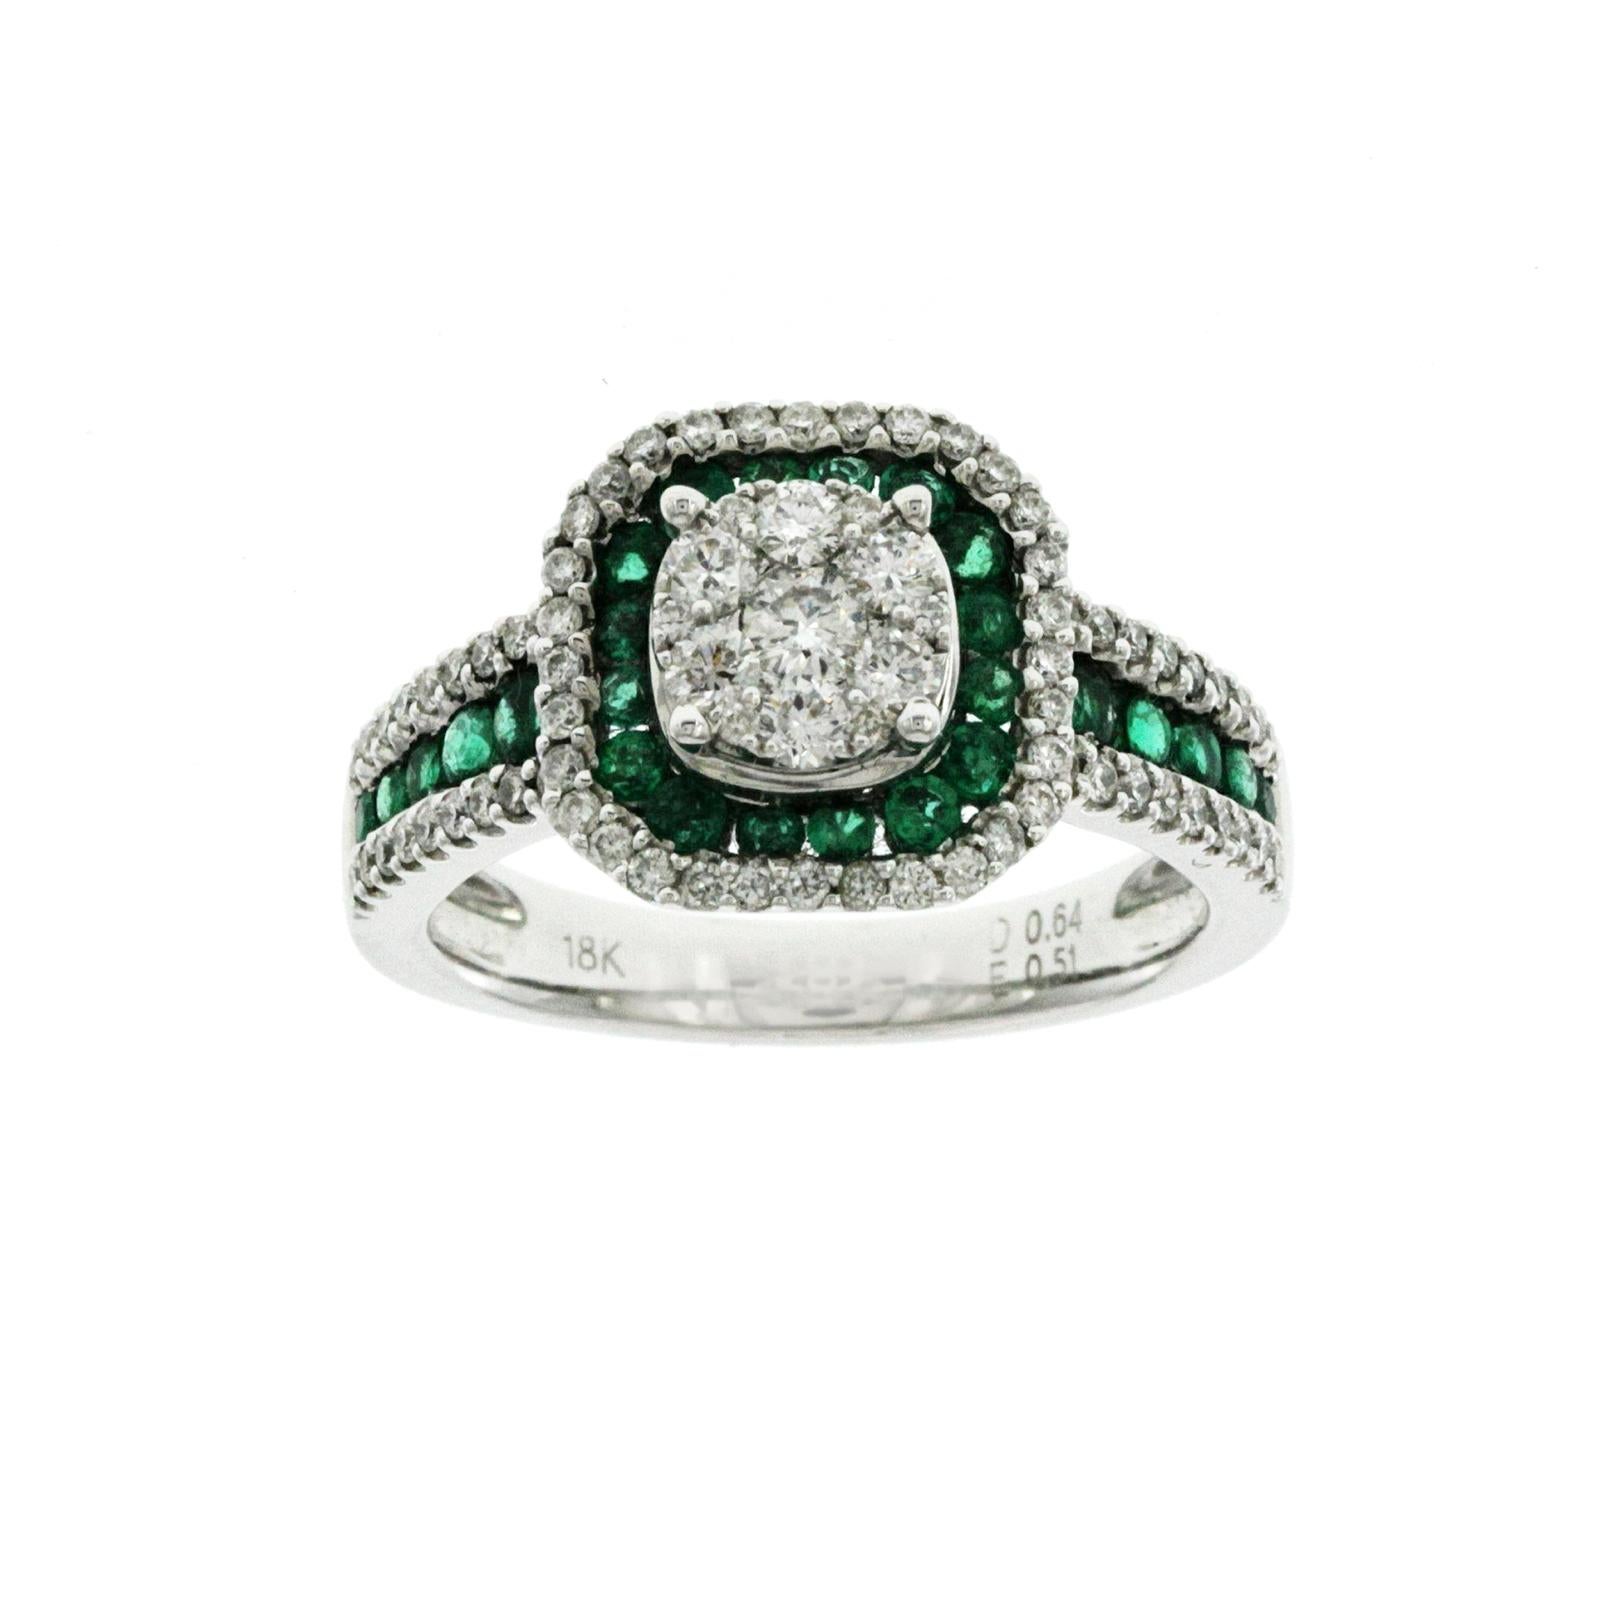 Round Cut 0.56 CT Emerald & 0.64 CT Diamonds in 18K White Gold Engagement Ring For Sale